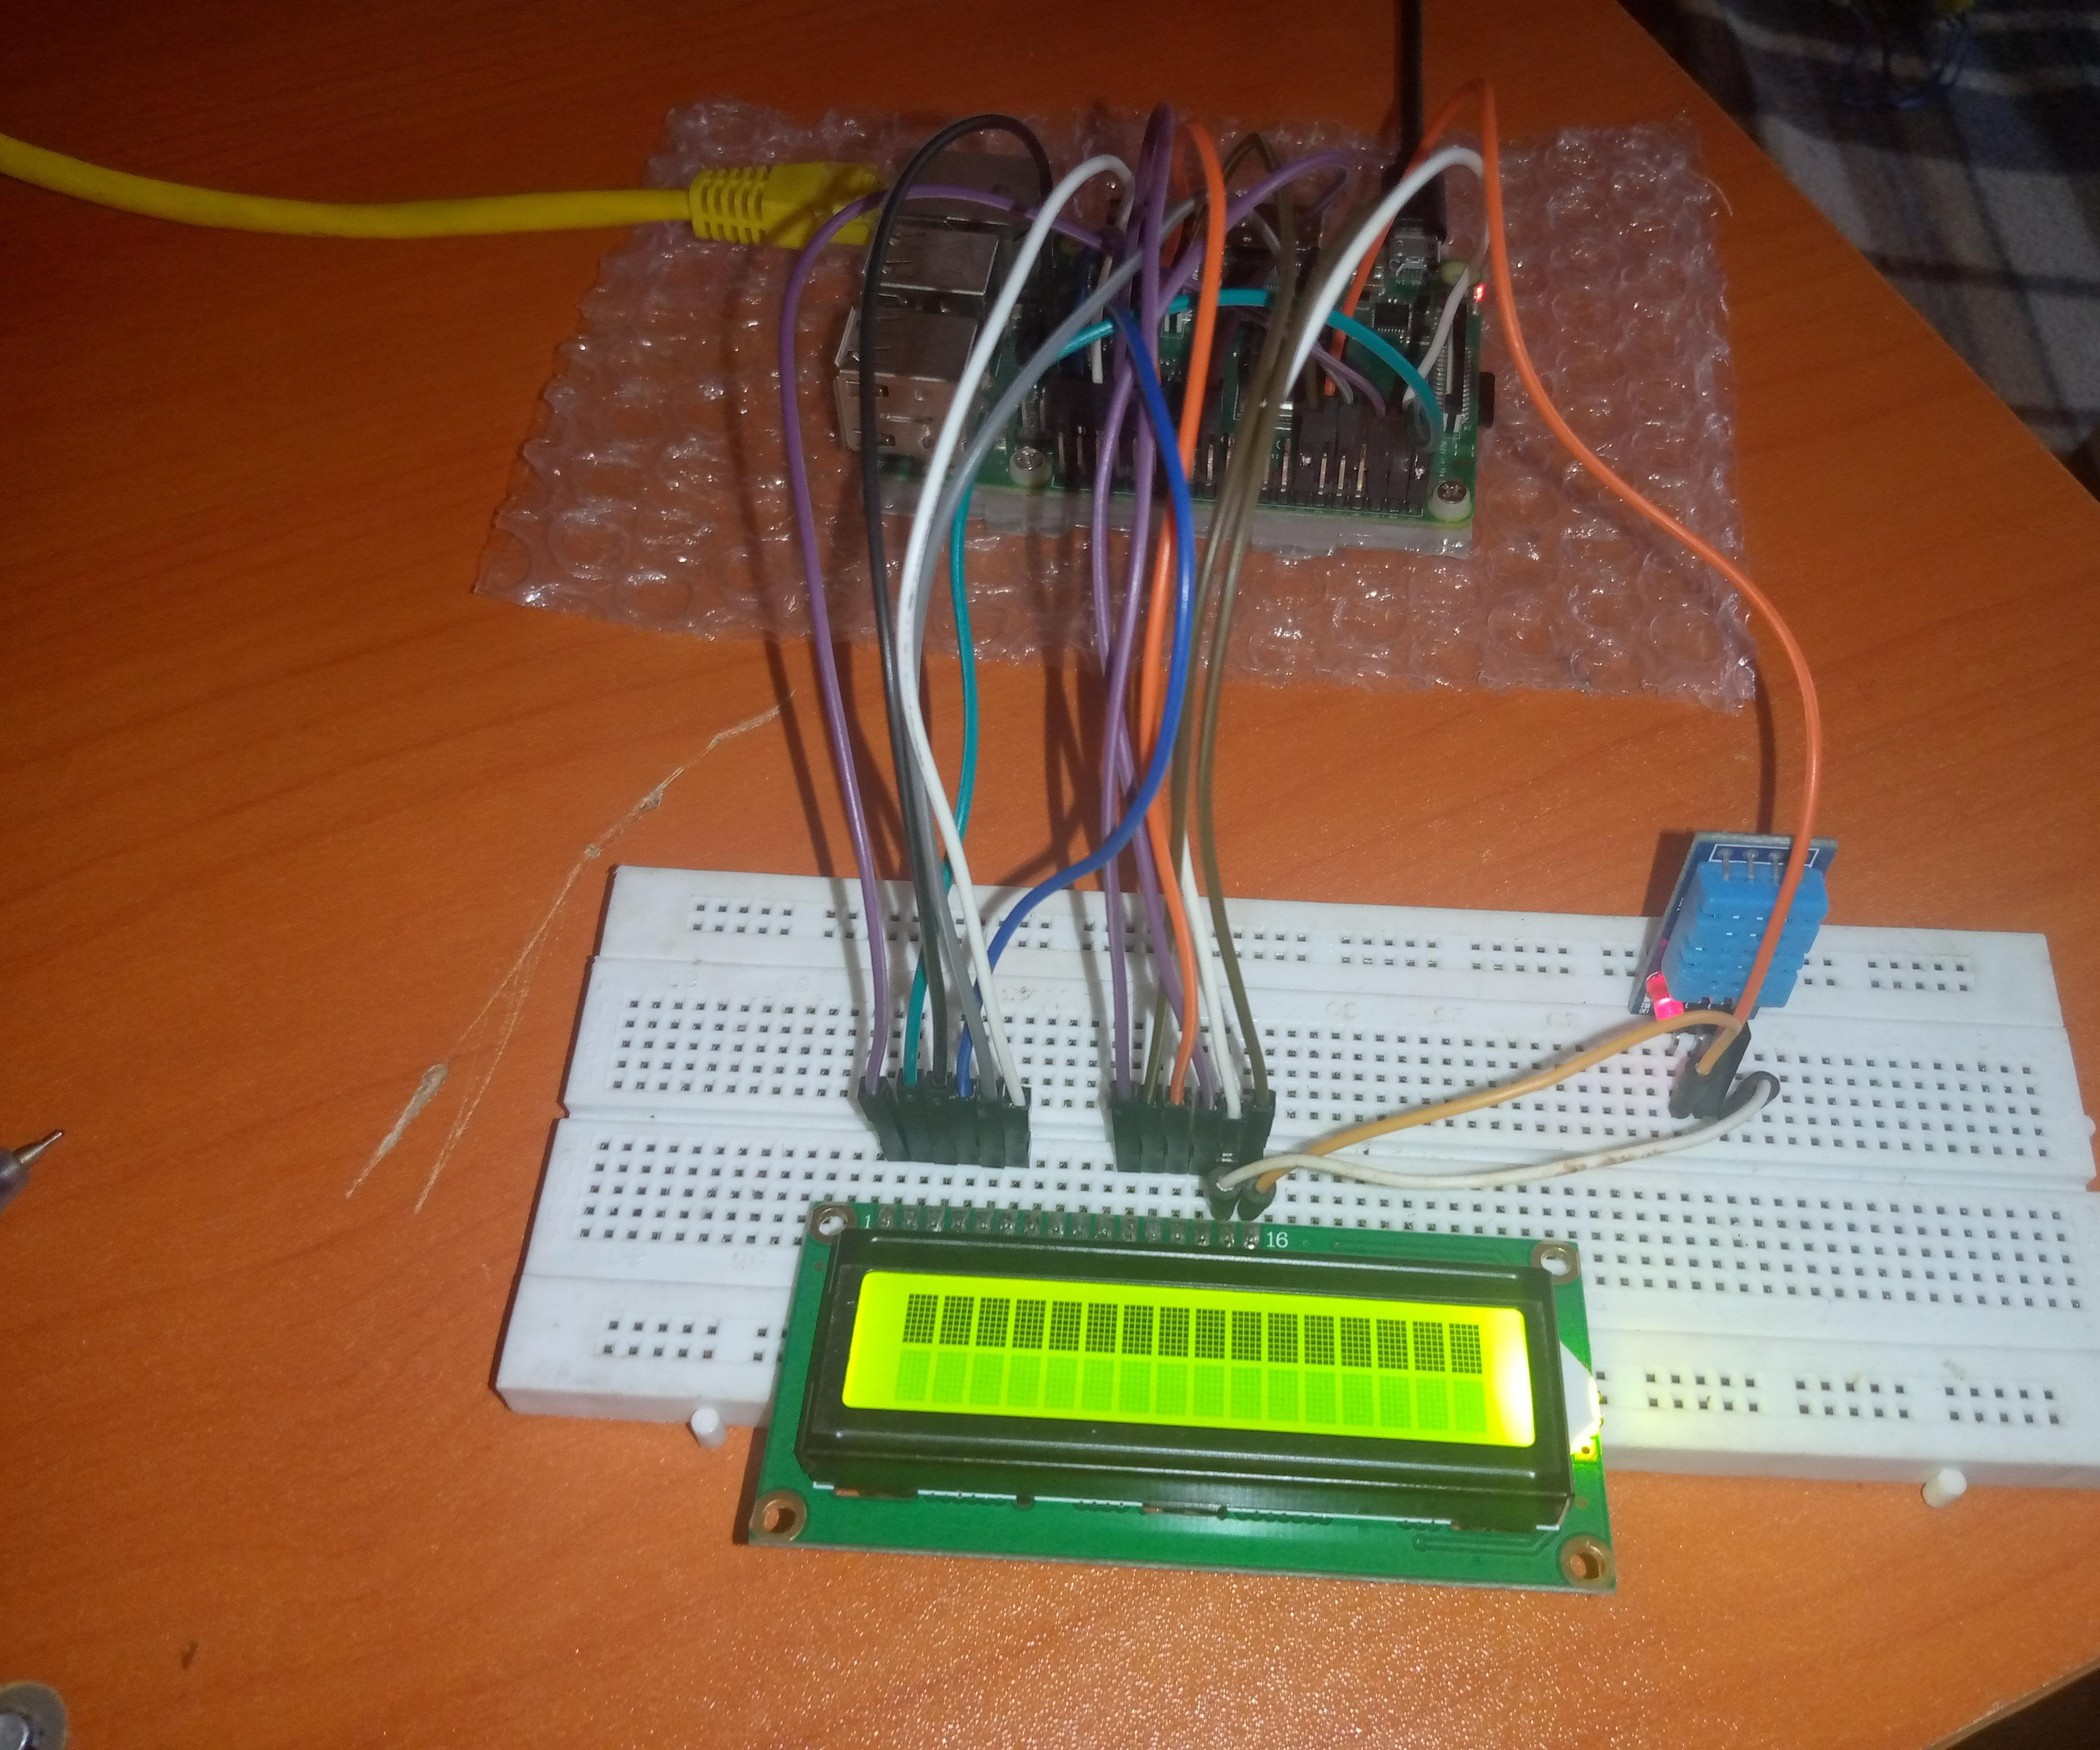 How to Read DHT Data on LCD Using Raspberry Pi